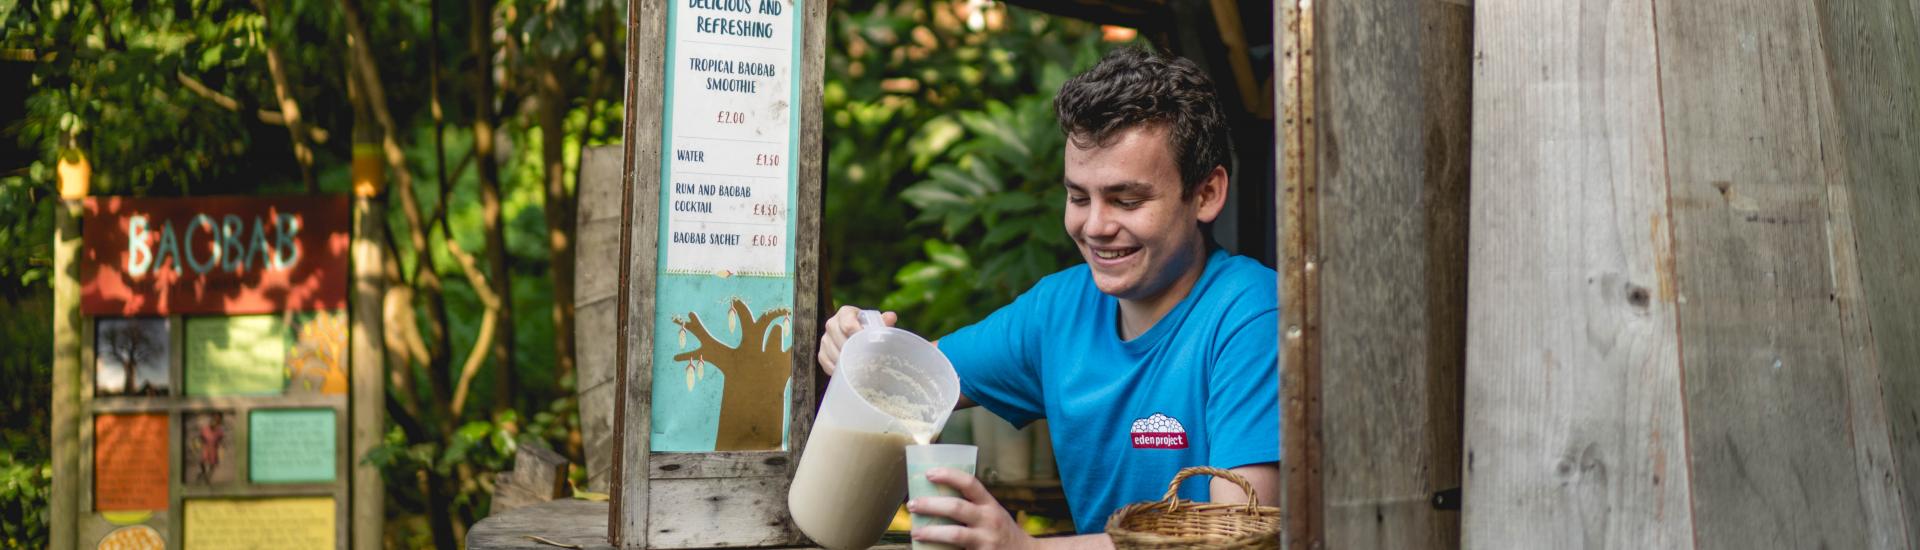 A male Eden Team member pouring a pitcher of drink into a glass at the Baobab & Rum Bar